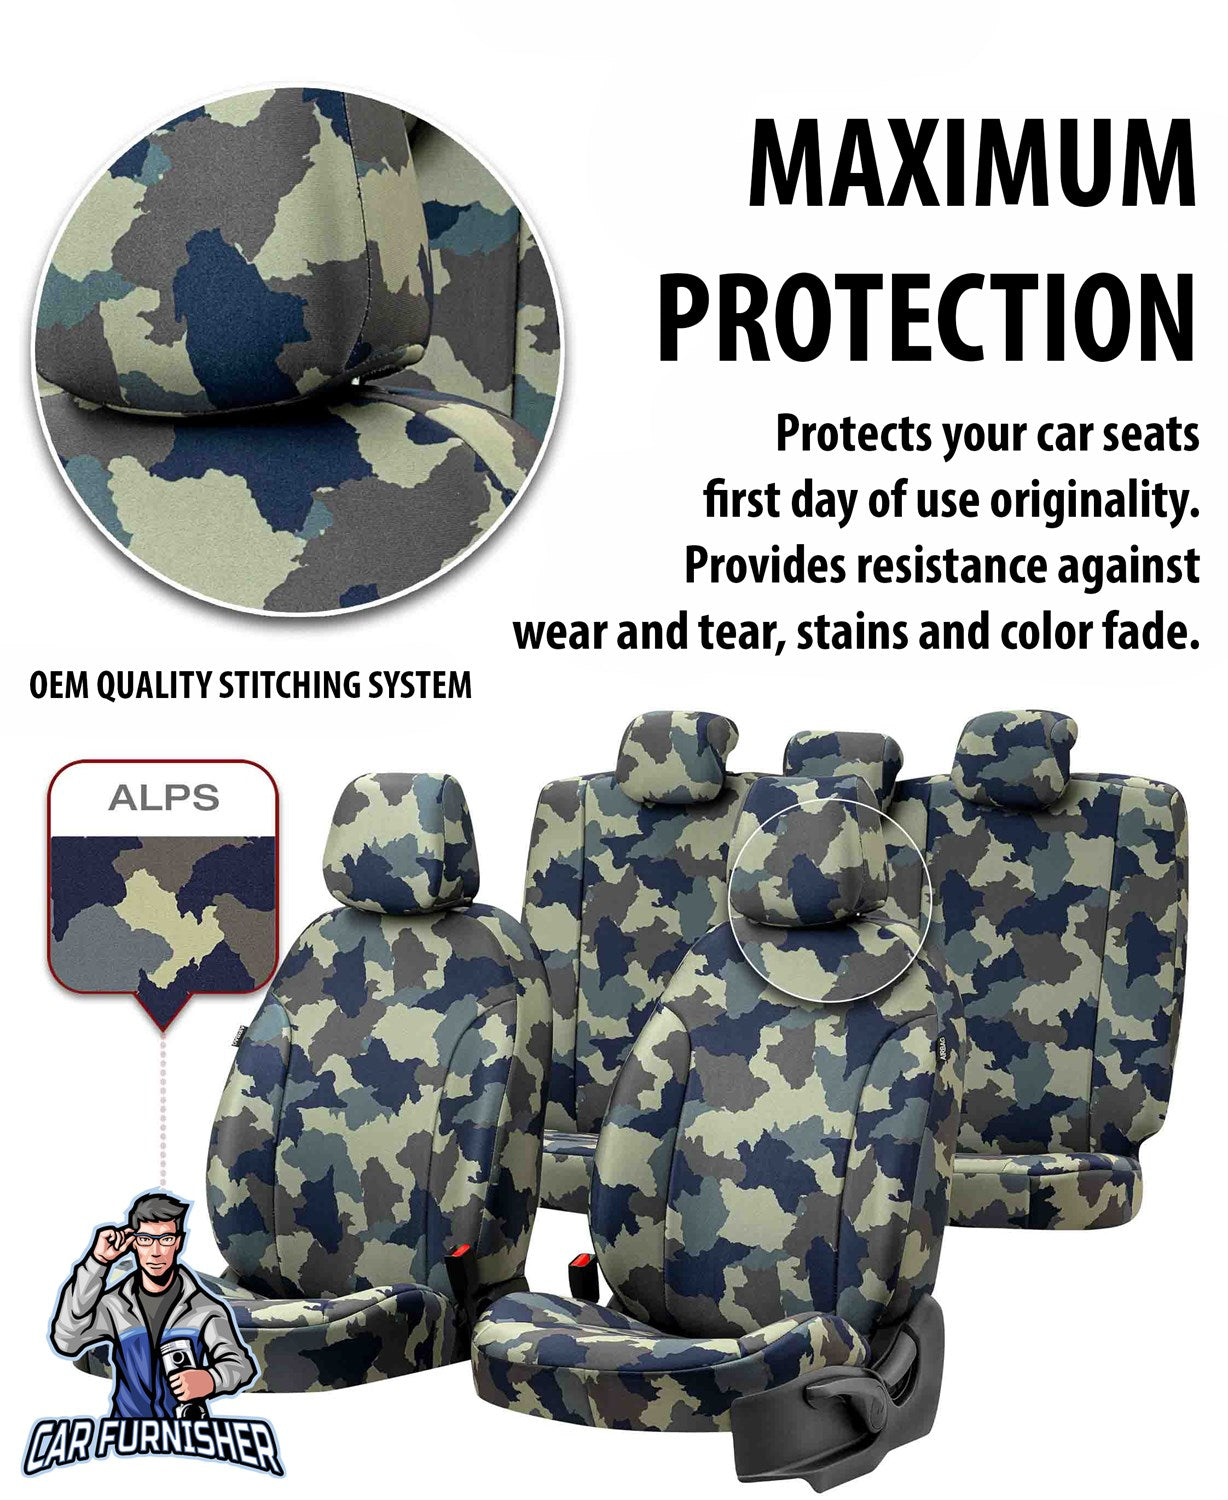 Ford Tourneo Courier Seat Covers Camouflage Waterproof Design Montblanc Camo Waterproof Fabric